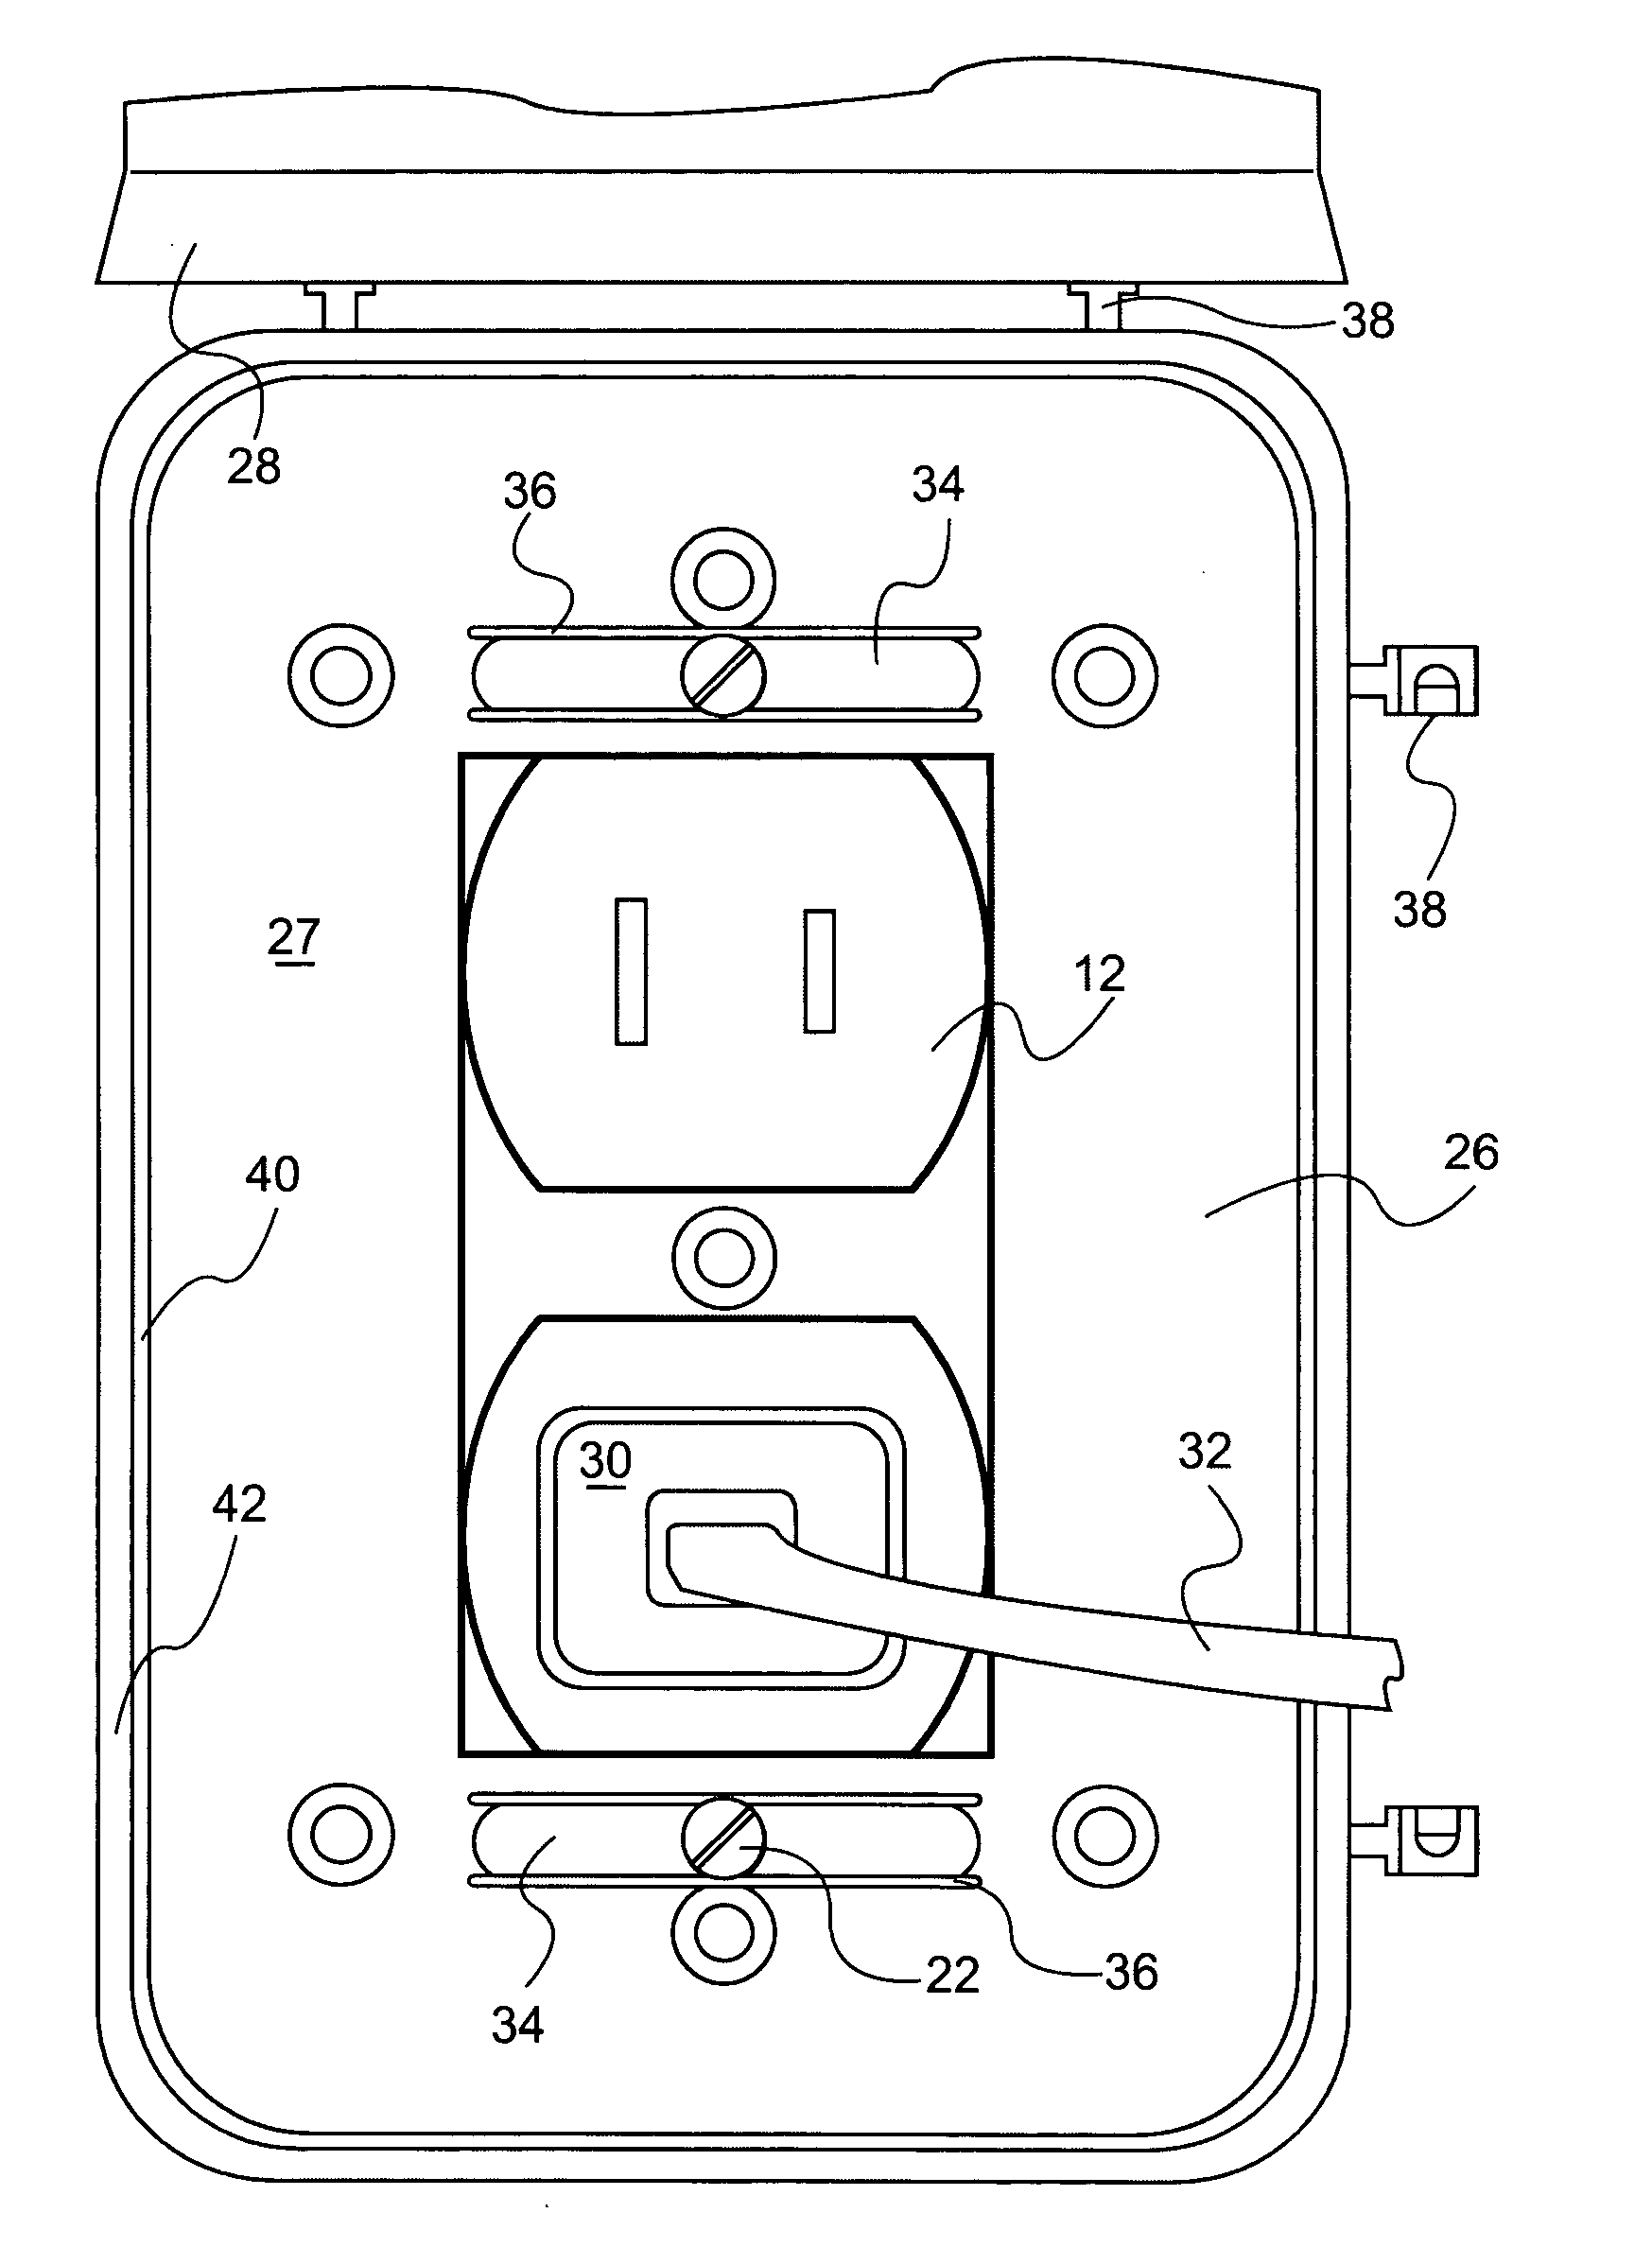 Base and electrical outlet having an expandable base mounting aperture and method for making same